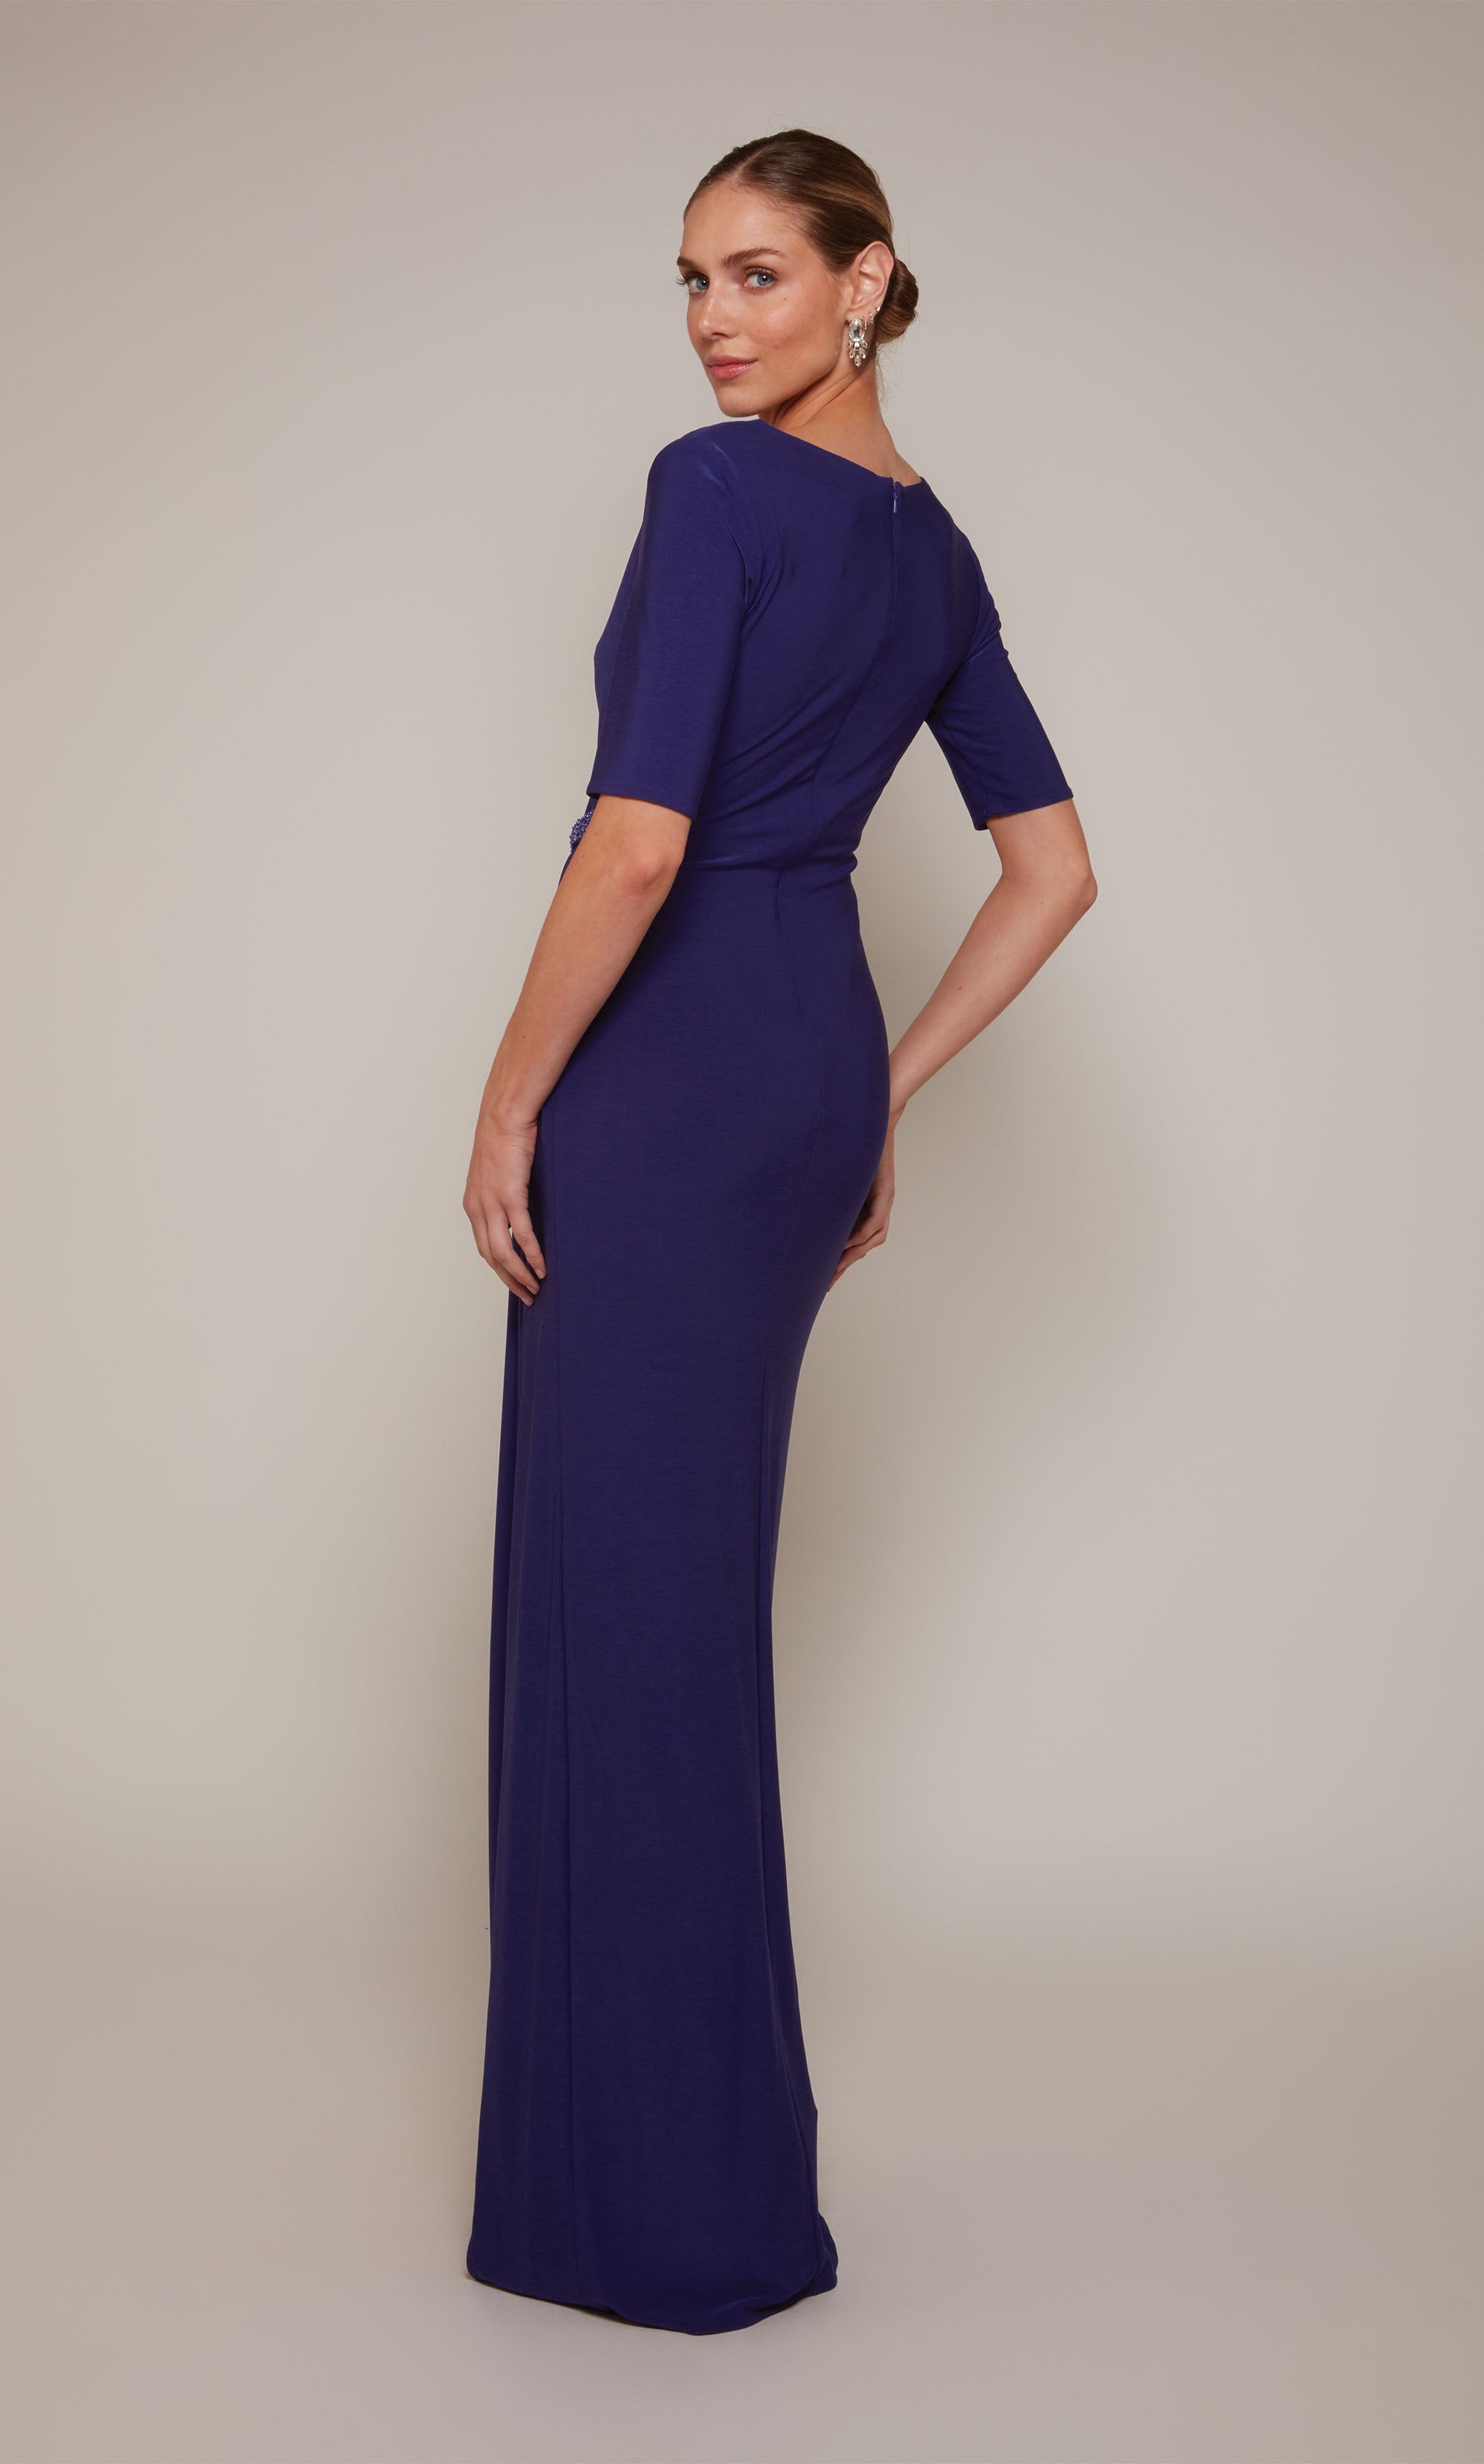 A ruched wedding guest dress with a V-neckline, short sleeves, and a side slit in royal blue.